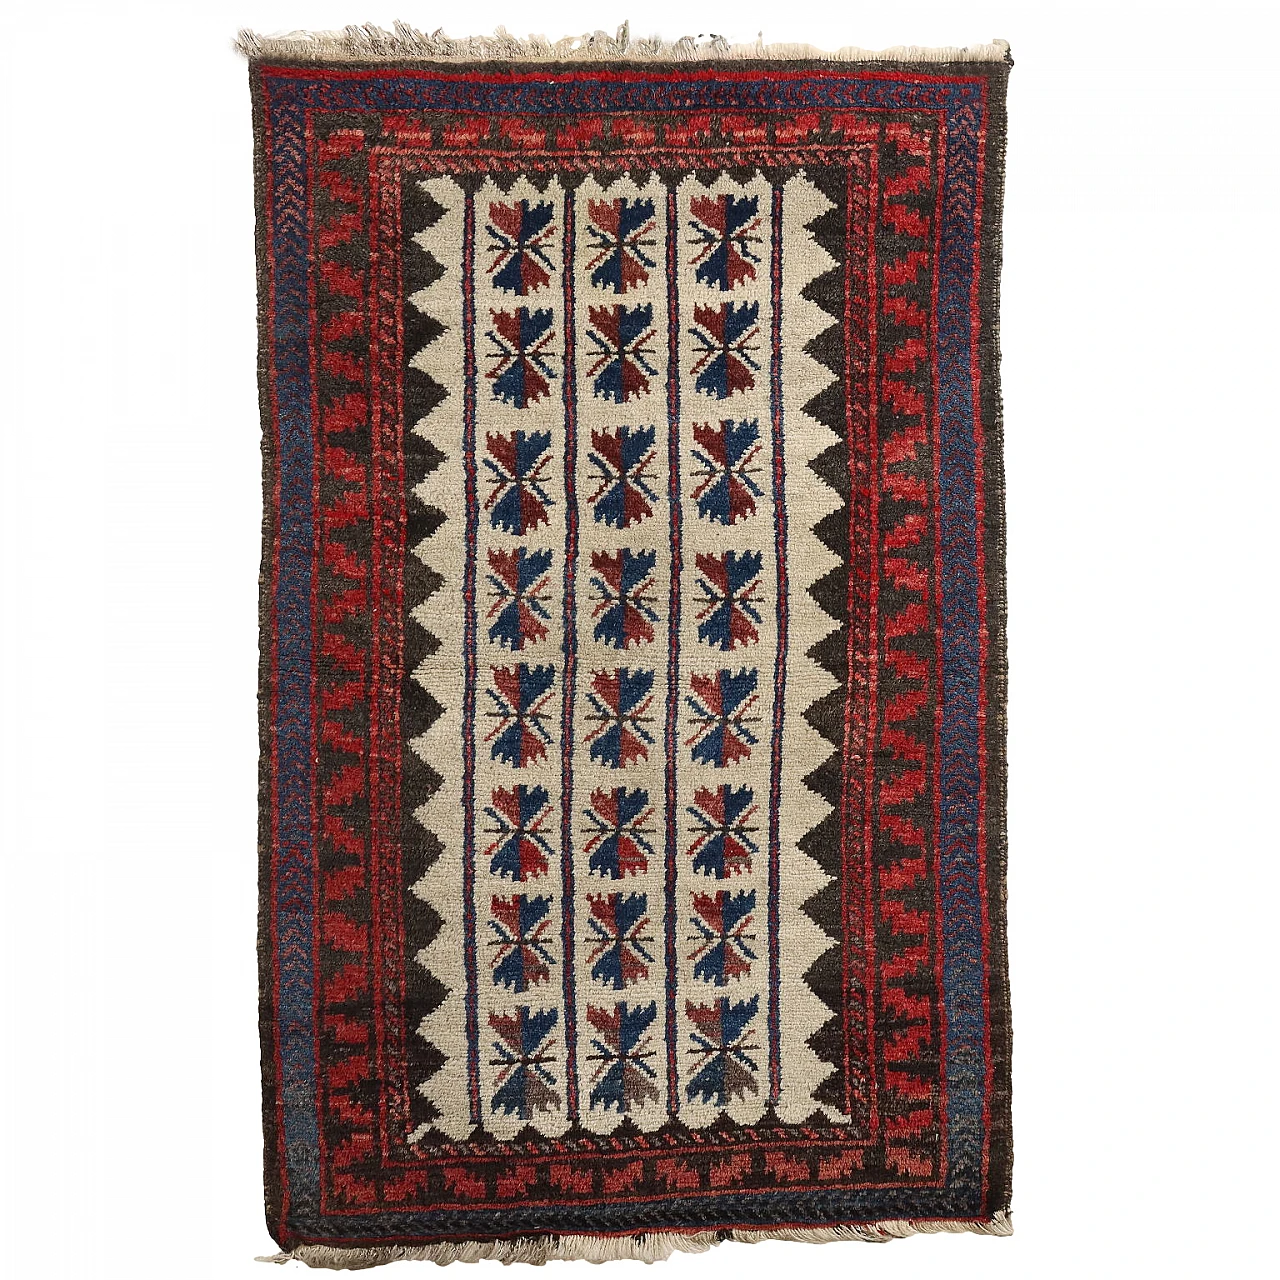 Iranian red, blue and beige wool Beluchi rug 1